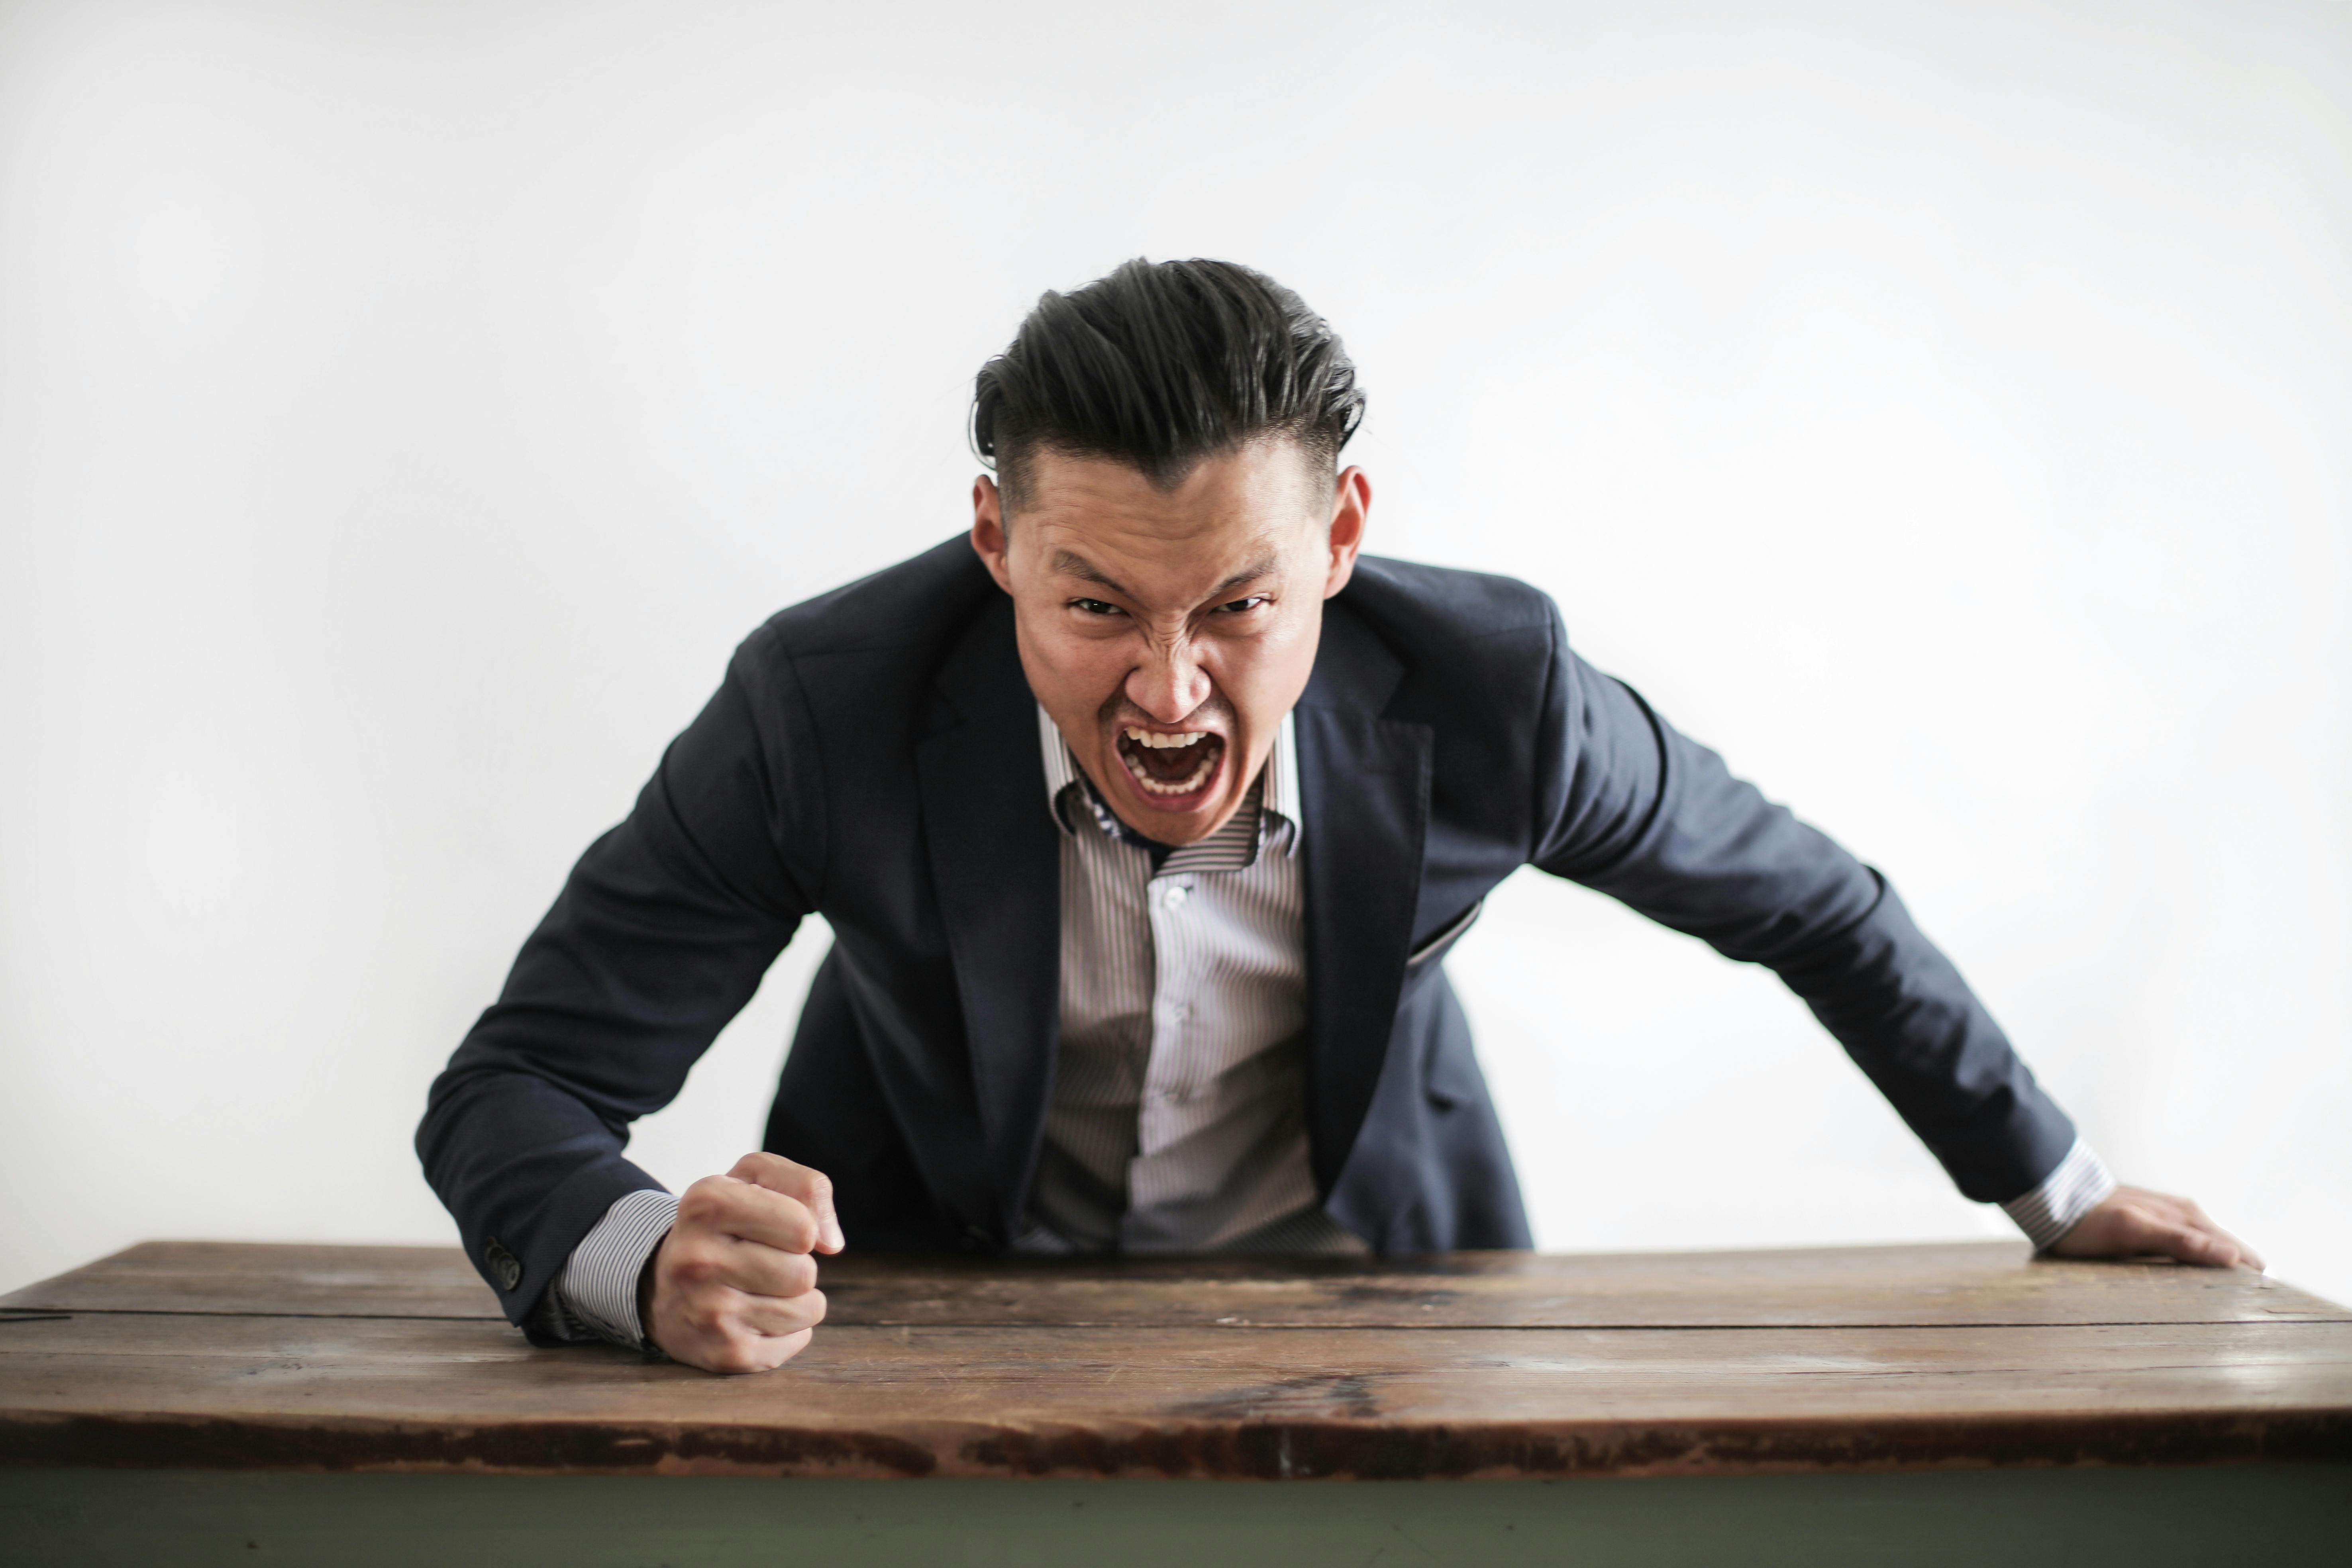 An angry man banging his fist on a table | Source: Pexels